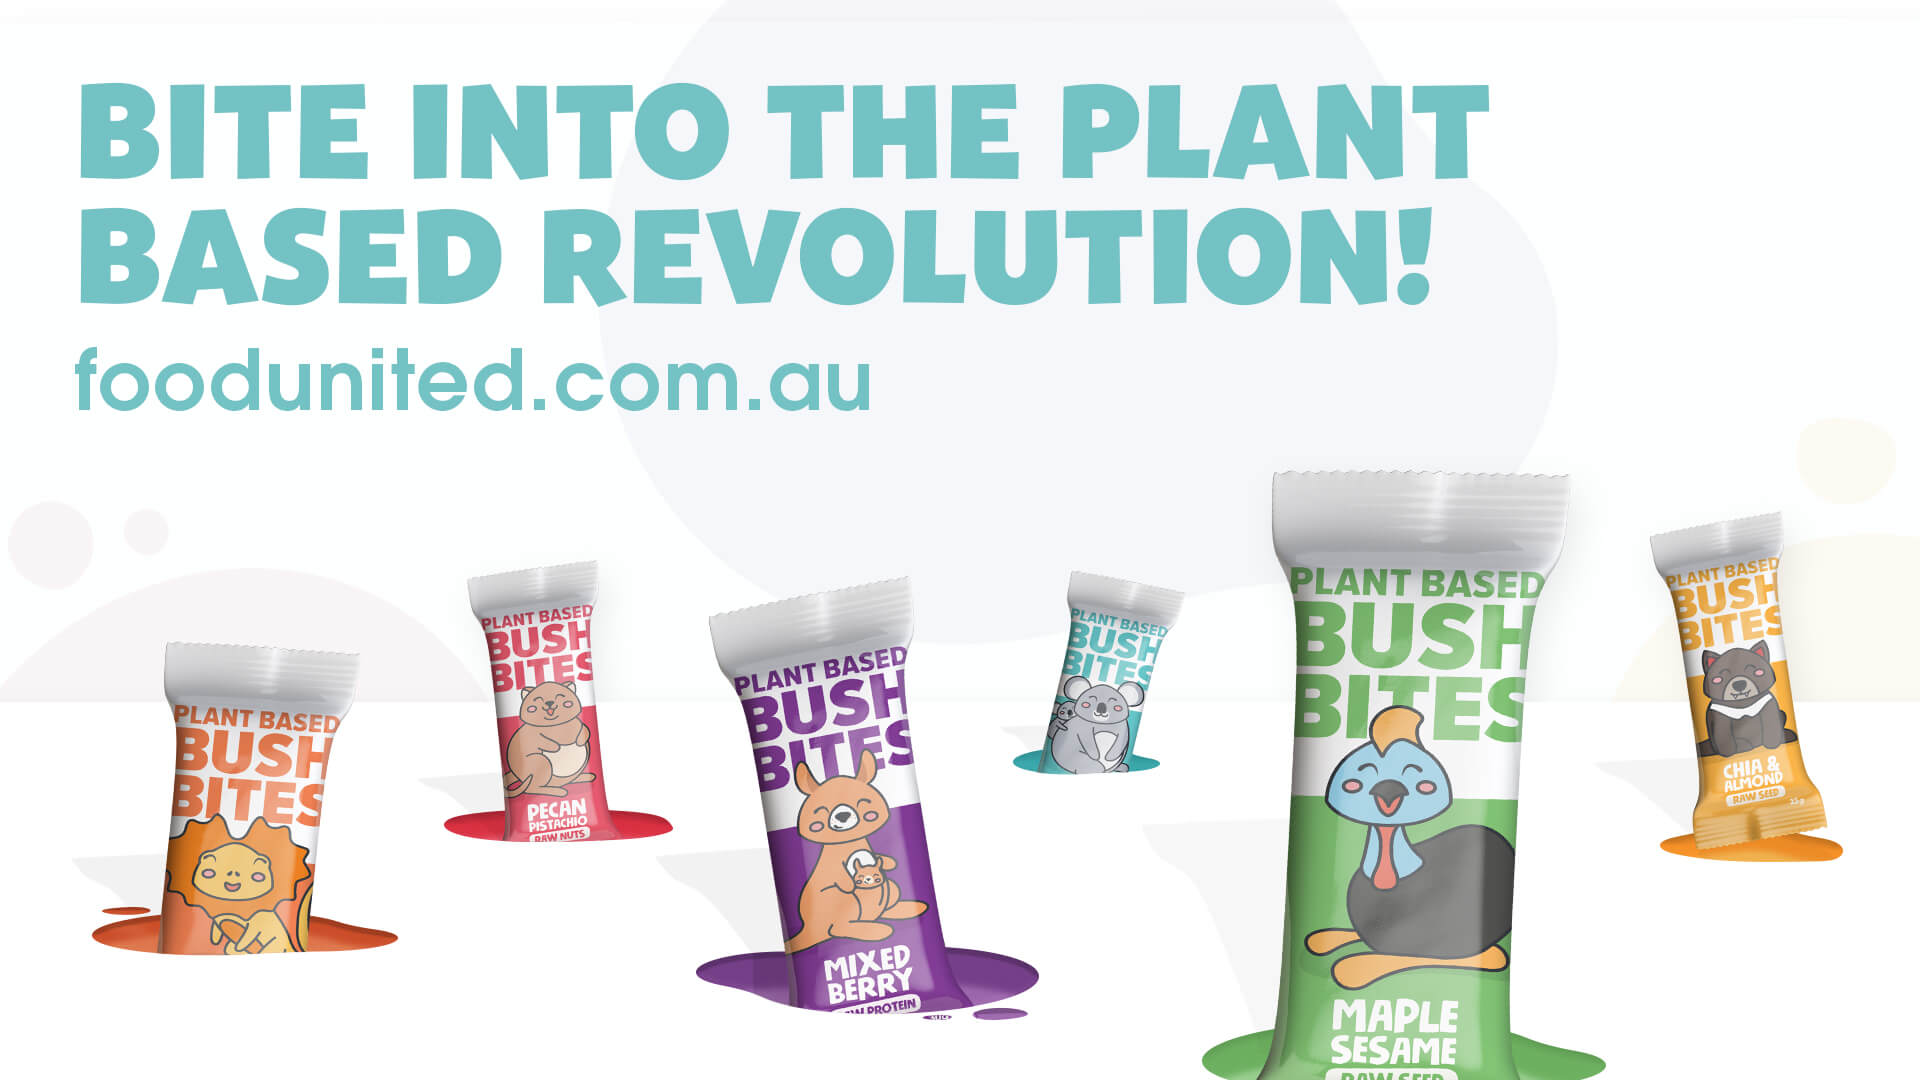 Marketing and Design Agency - Poloko - Northern Beaches - Food United